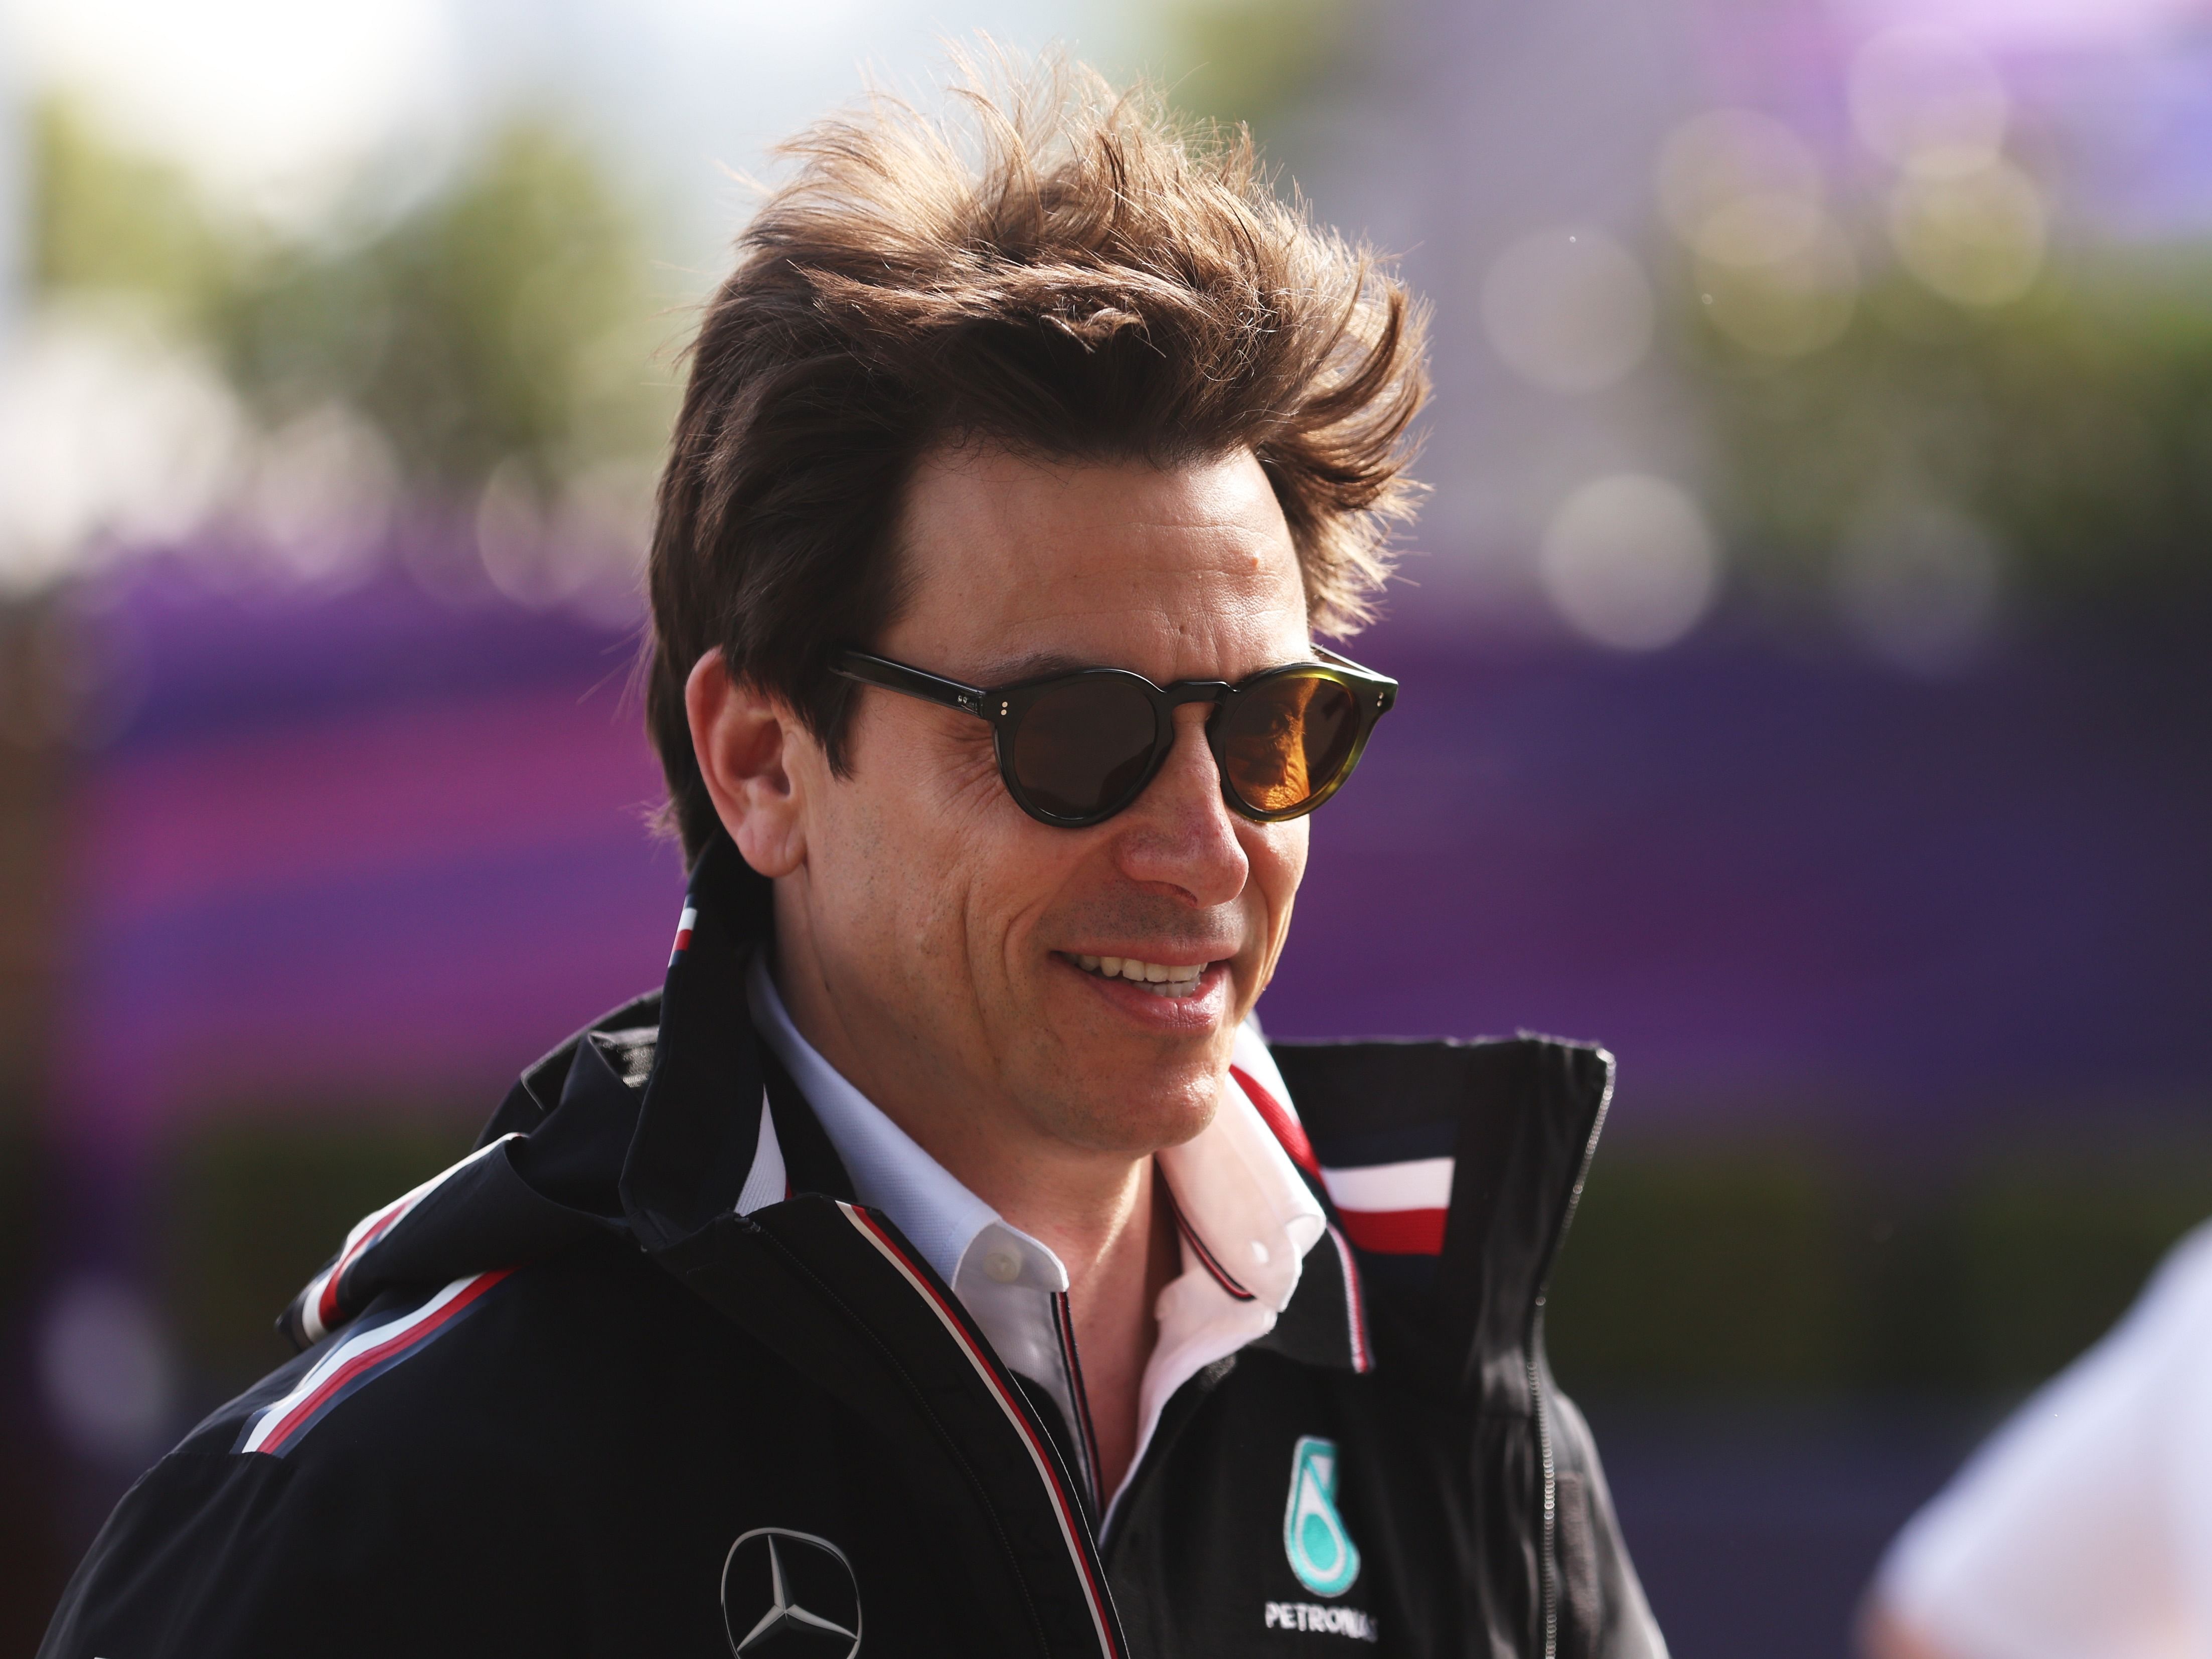 Mercedes GP Executive Director Toto Wolff walks in the paddock during practice ahead of the 2023 F1 Australian Grand Prix (Photo by Robert Cianflone/Getty Images)